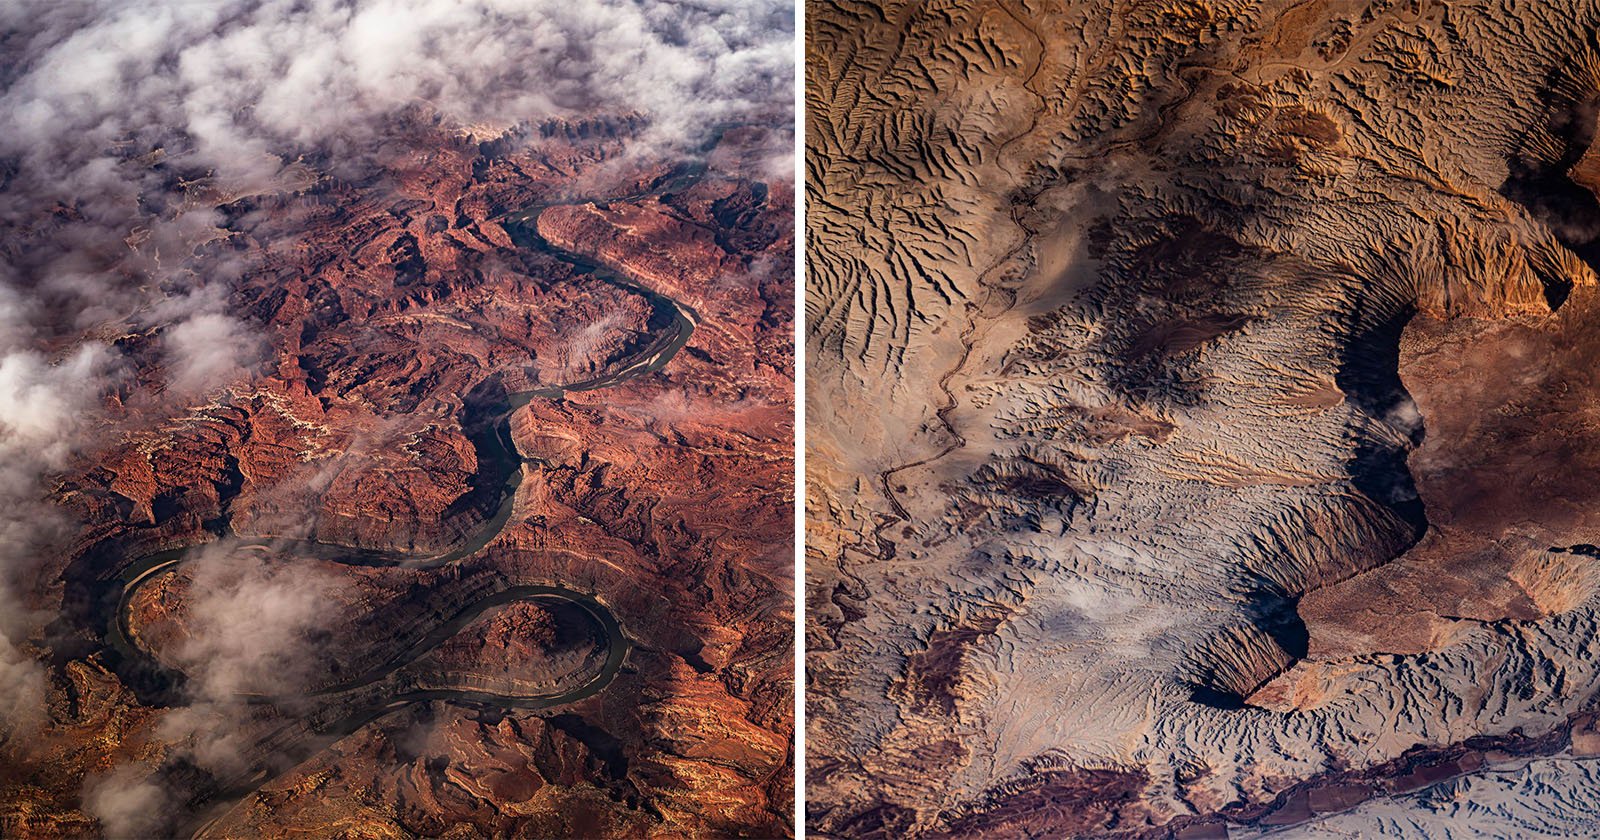 How to Capture Great Aerial Landscape Photos on Your Next Flight